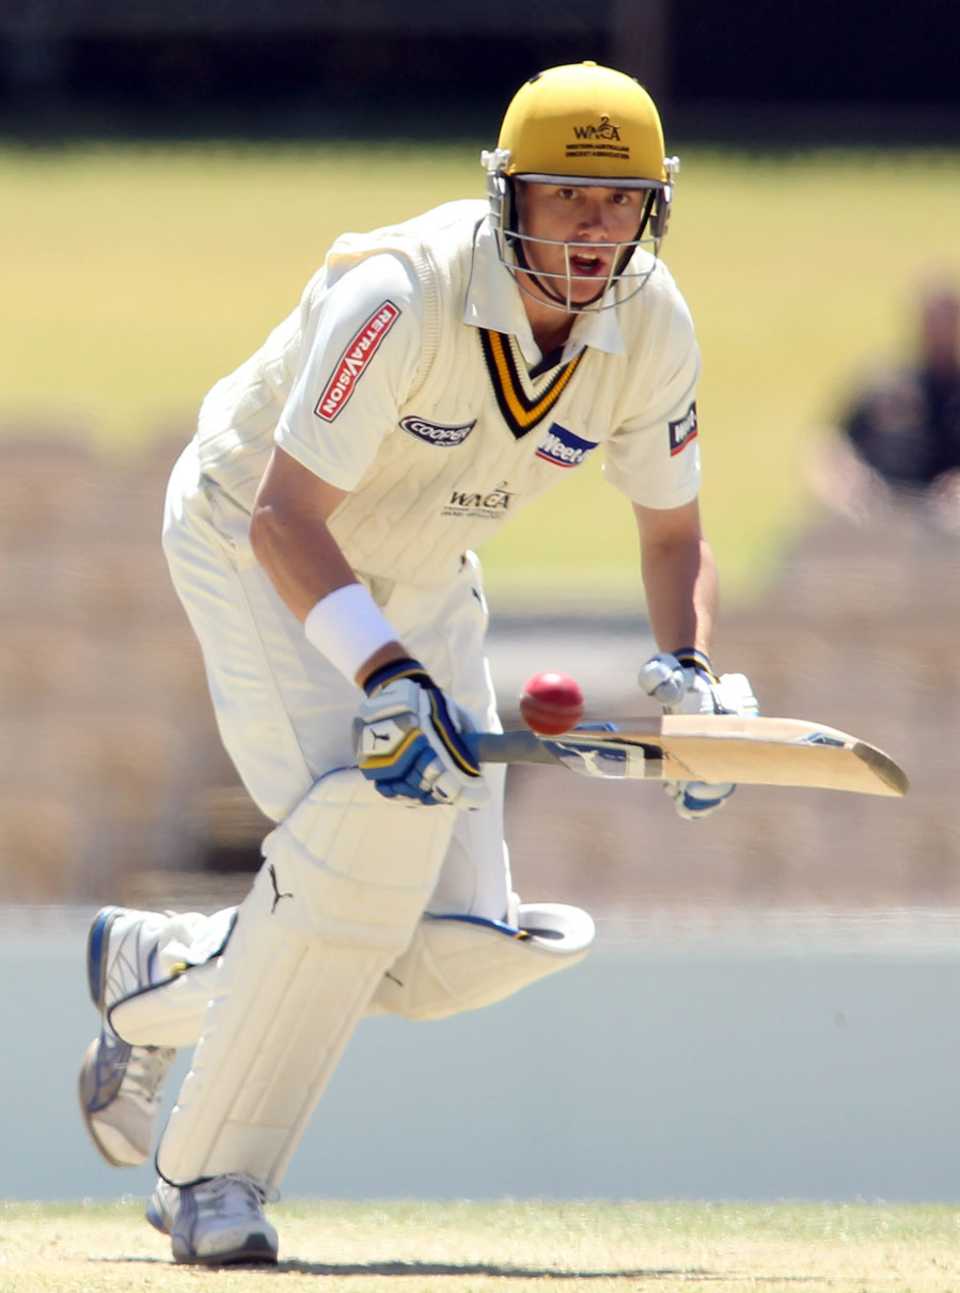 Marcus North thinks about a run, South Australia v Western Australia, Sheffield Shield, Adelaide, 4th day, November 1, 2010